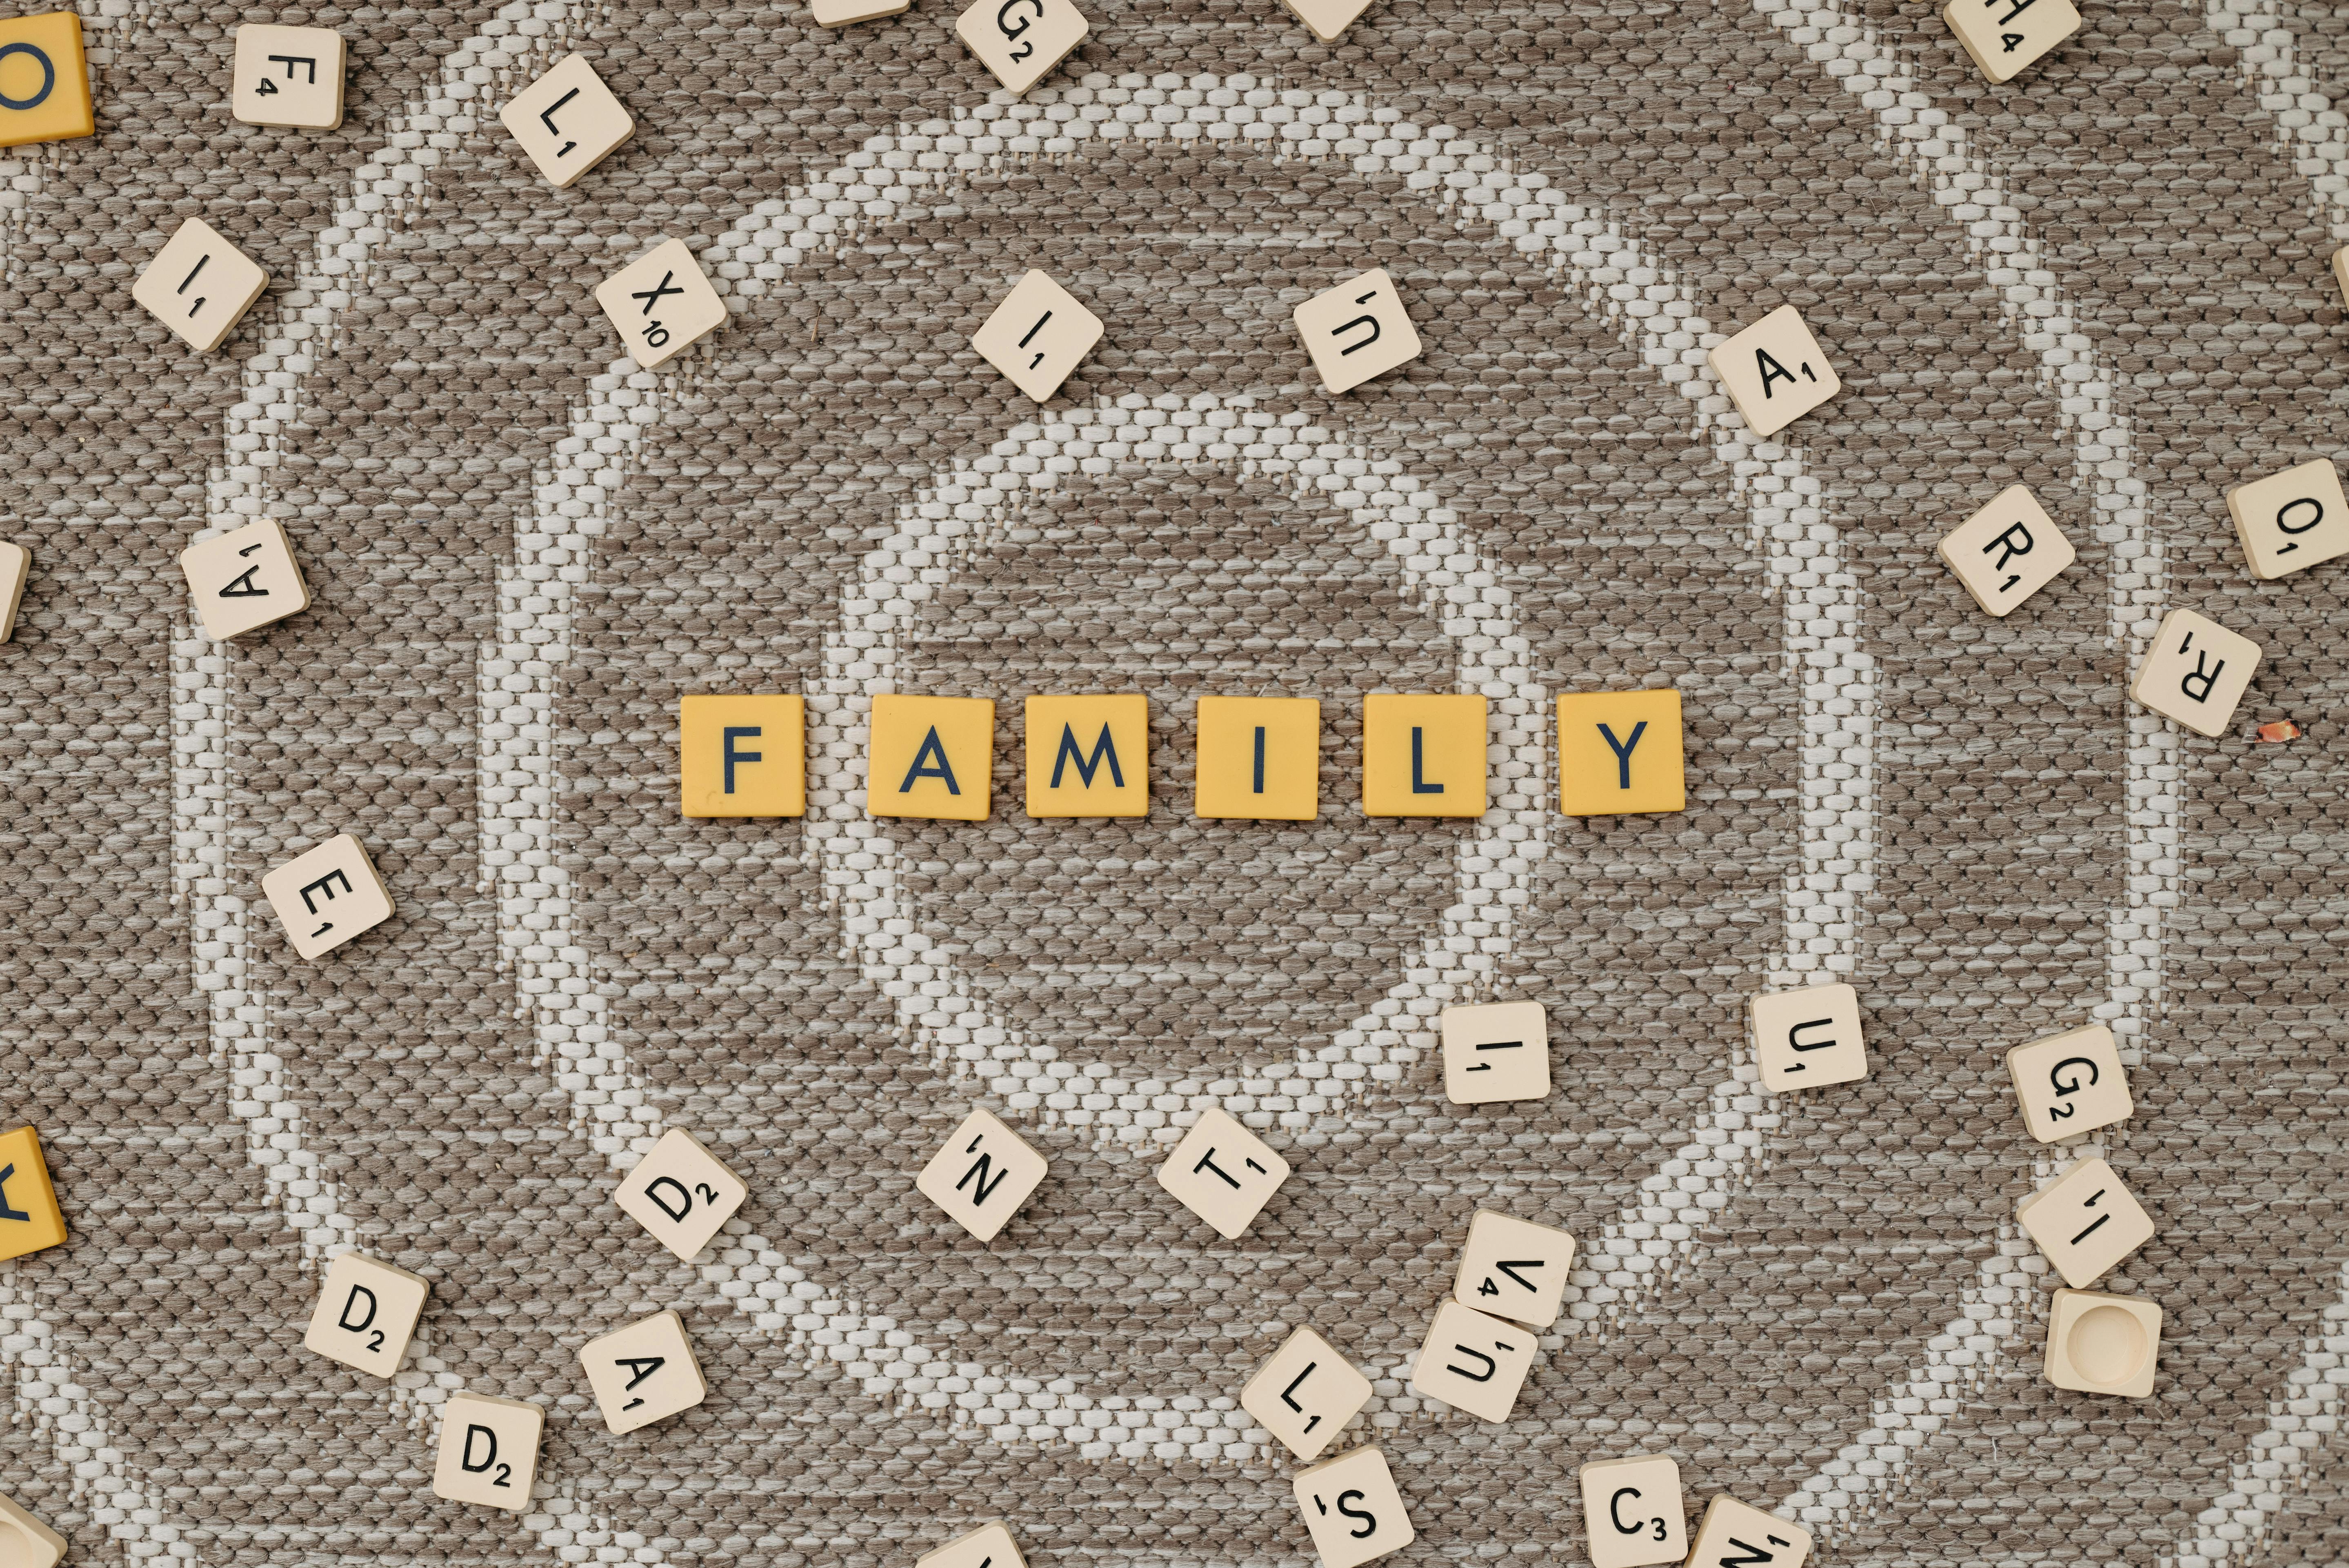 Scrabble Tiles Spell out the Word Family